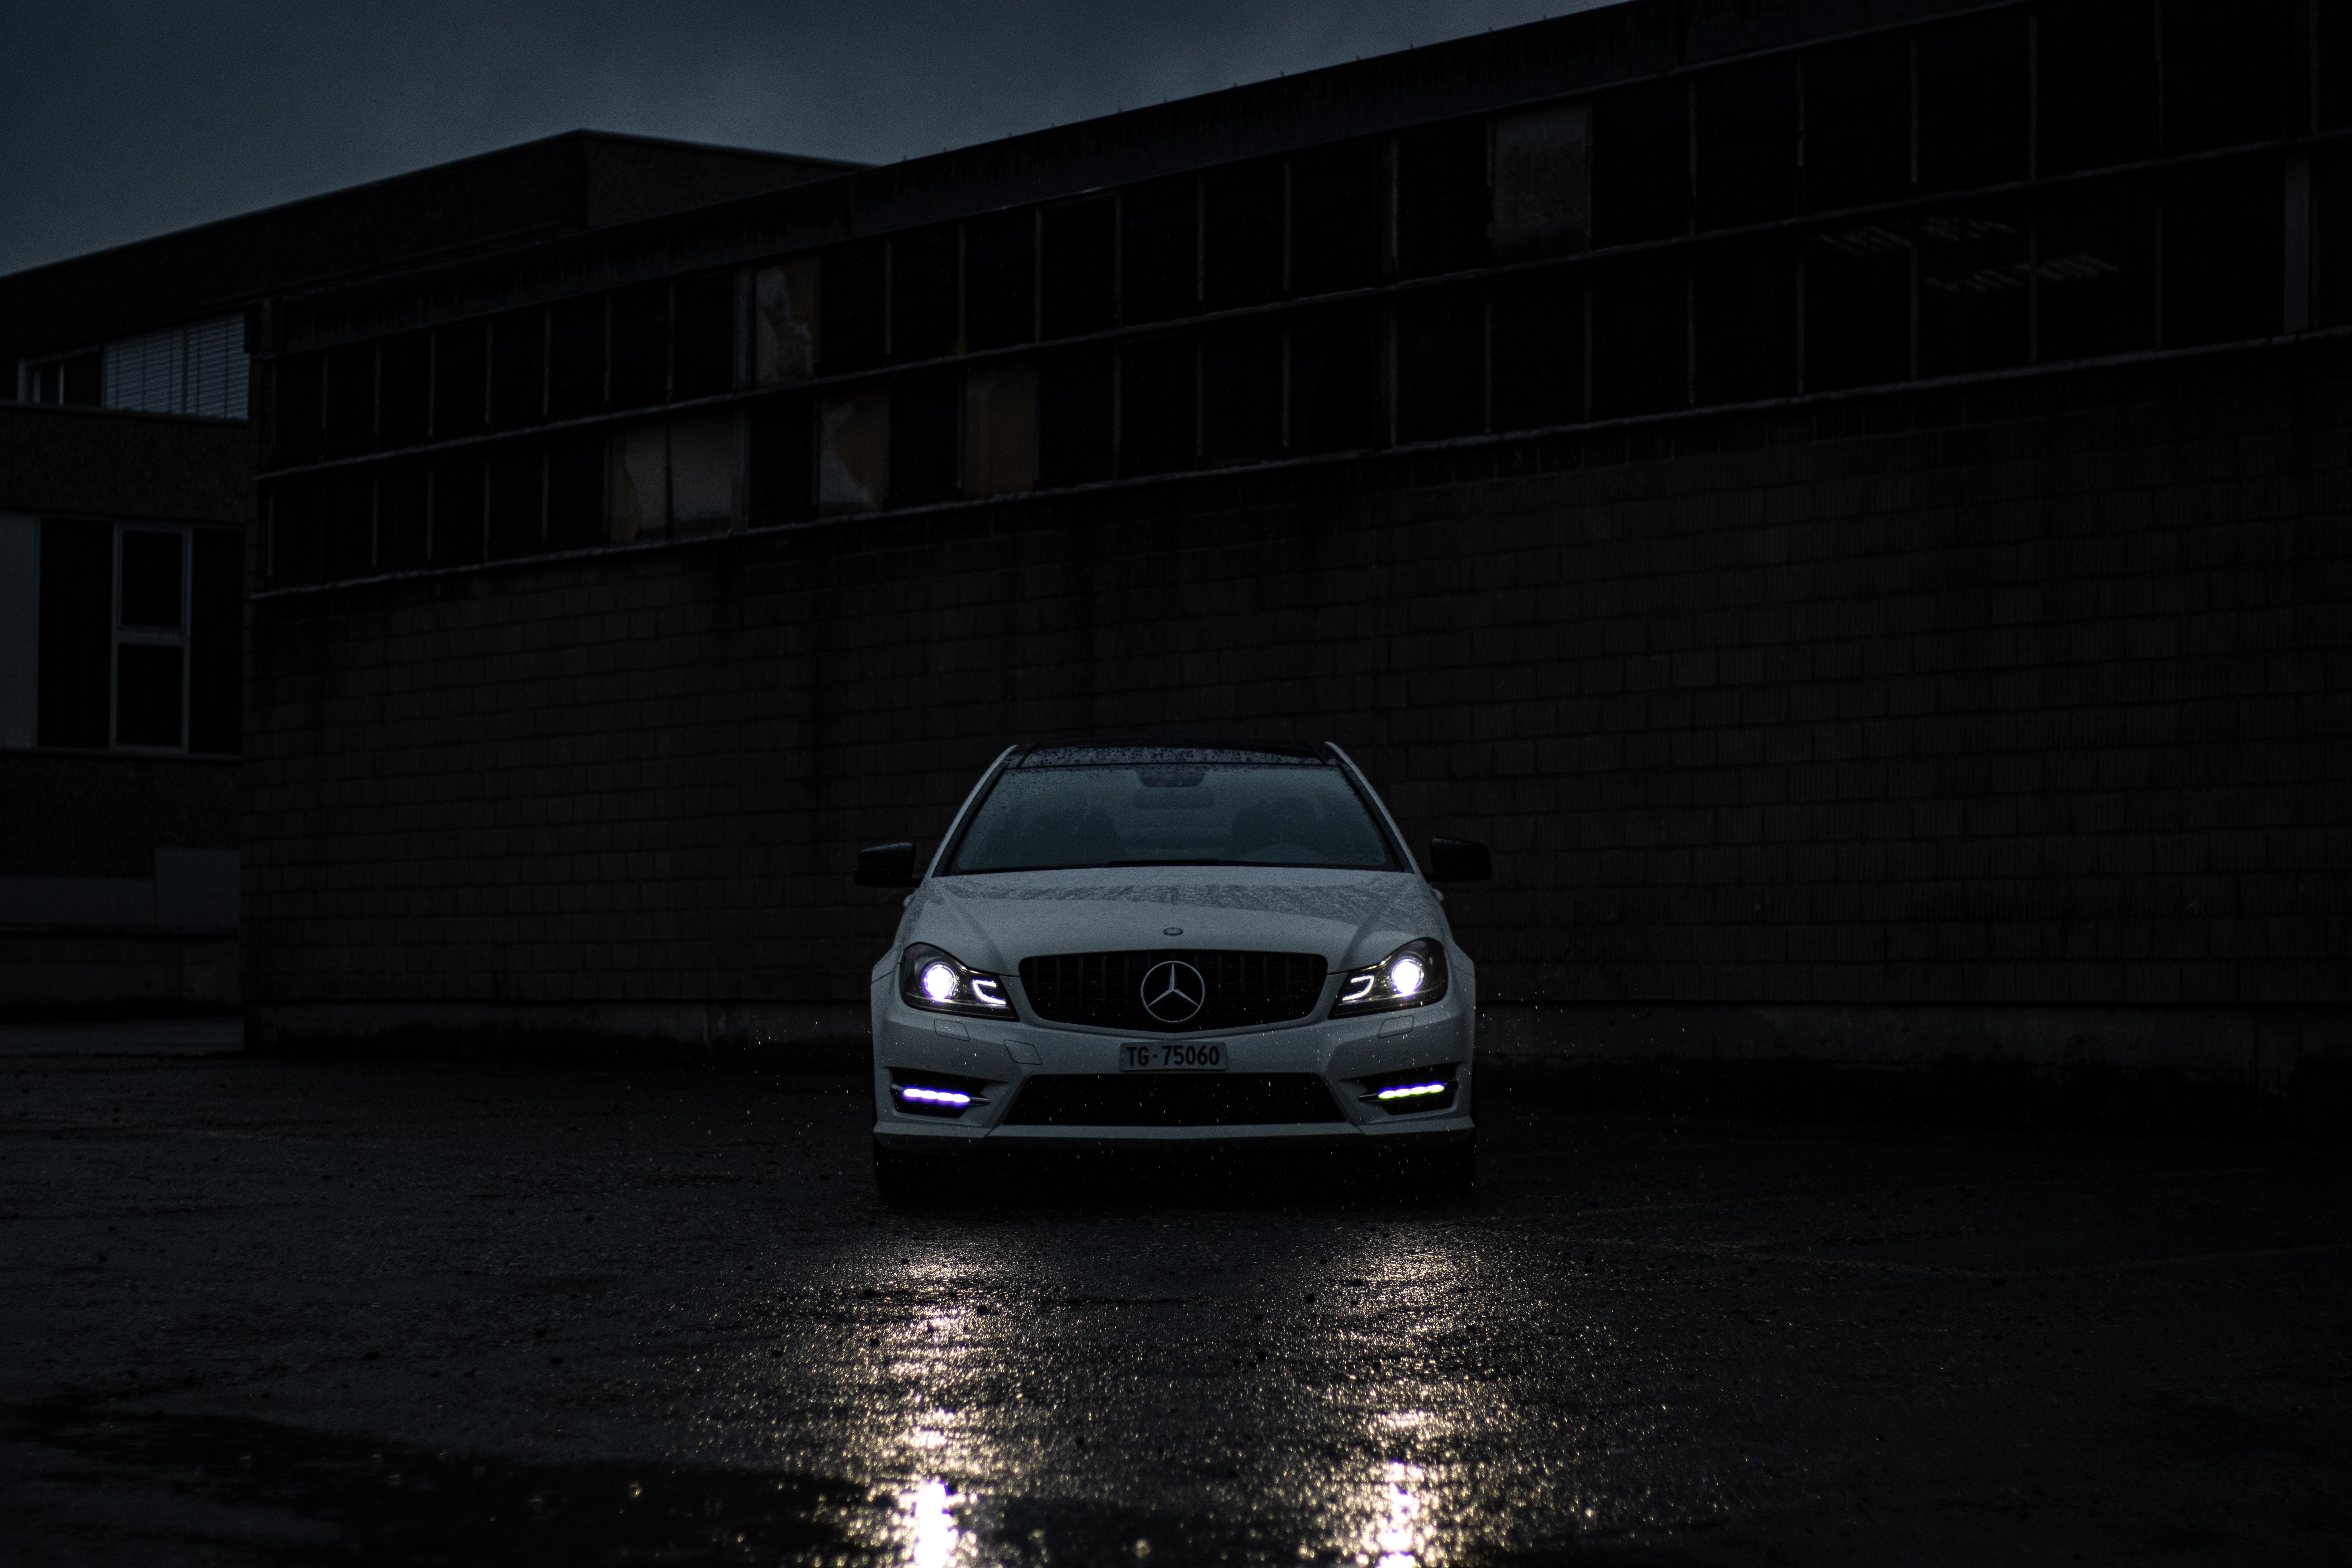 mercedes benz, headlights, cars, front view, white, lights, car Full HD